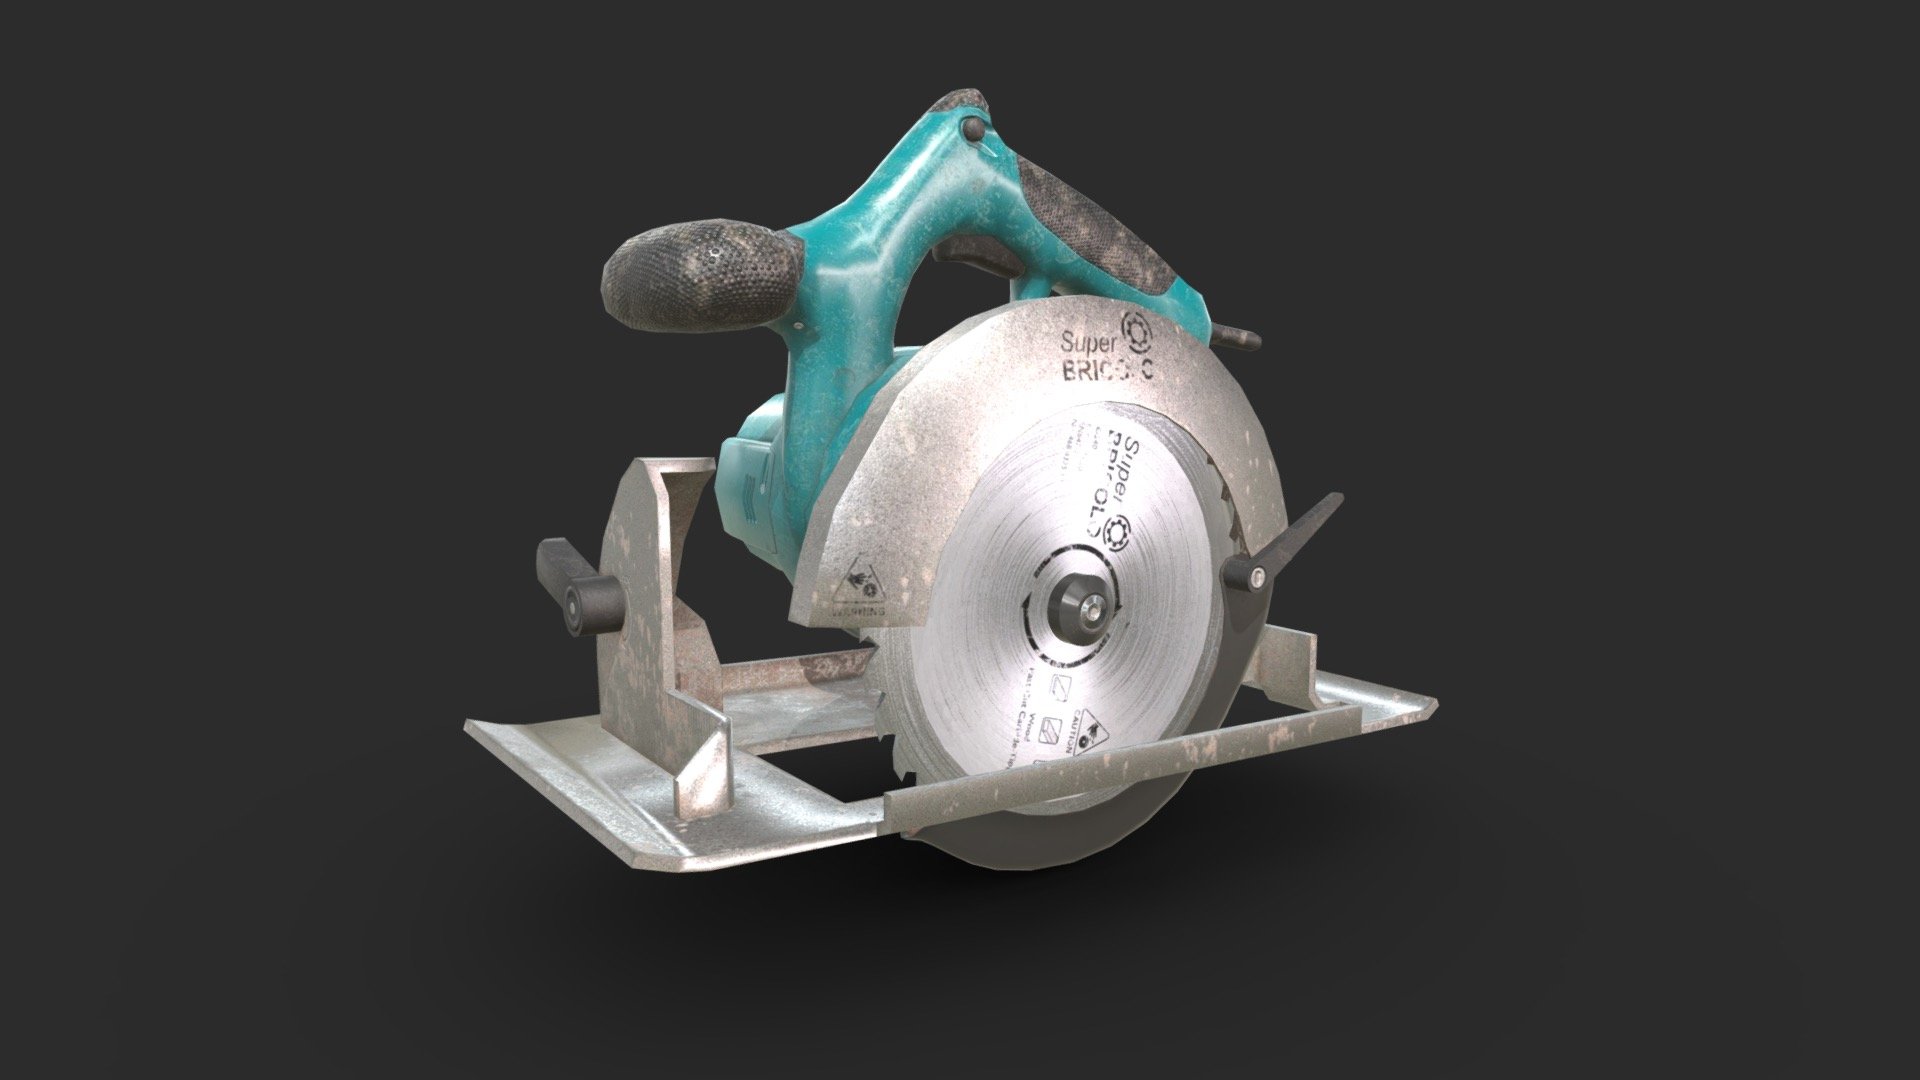 This electrical circular saw including 3 LODs and colliders. All elements are in realistic style and can be seperated (the saw blade) to be animated and ready for any game (post-apo, first person shooter, construction… ). All objects share a unique material for the best optimization for games.

Low-poly model &amp; Blender native 2.93

SPECIFICATIONS


Objects : 3
Polygons : 2526
Subdivision ready : No
Render engine : Eevee (Cycles ready)

GAME SPECS


LODs : Yes (inside FBX for Unity &amp; Unreal)
Numbers of LODs : 3
Collider : Yes
Lightmap UV : No

EXPORTED FORMATS


FBX
Collada
OBJ
GLTF

TEXTURES


Materials in scene : 1
Textures sizes : 4K
Textures types : Base Color, Metallic, Roughness, Normal (DirectX &amp; OpenGL), Heigh &amp; AO (also Unity &amp; Unreal workflow maps)
Textures format : PNG

GENERAL


Real scale : Yes
Scene objects are organized by groups

ADDITIONAL NOTES

File formats do not include textures. All textures are in a specific folder named &lsquo;Textures' - Circular Saw - Buy Royalty Free 3D model by KangaroOz 3D (@KangaroOz-3D) 3d model